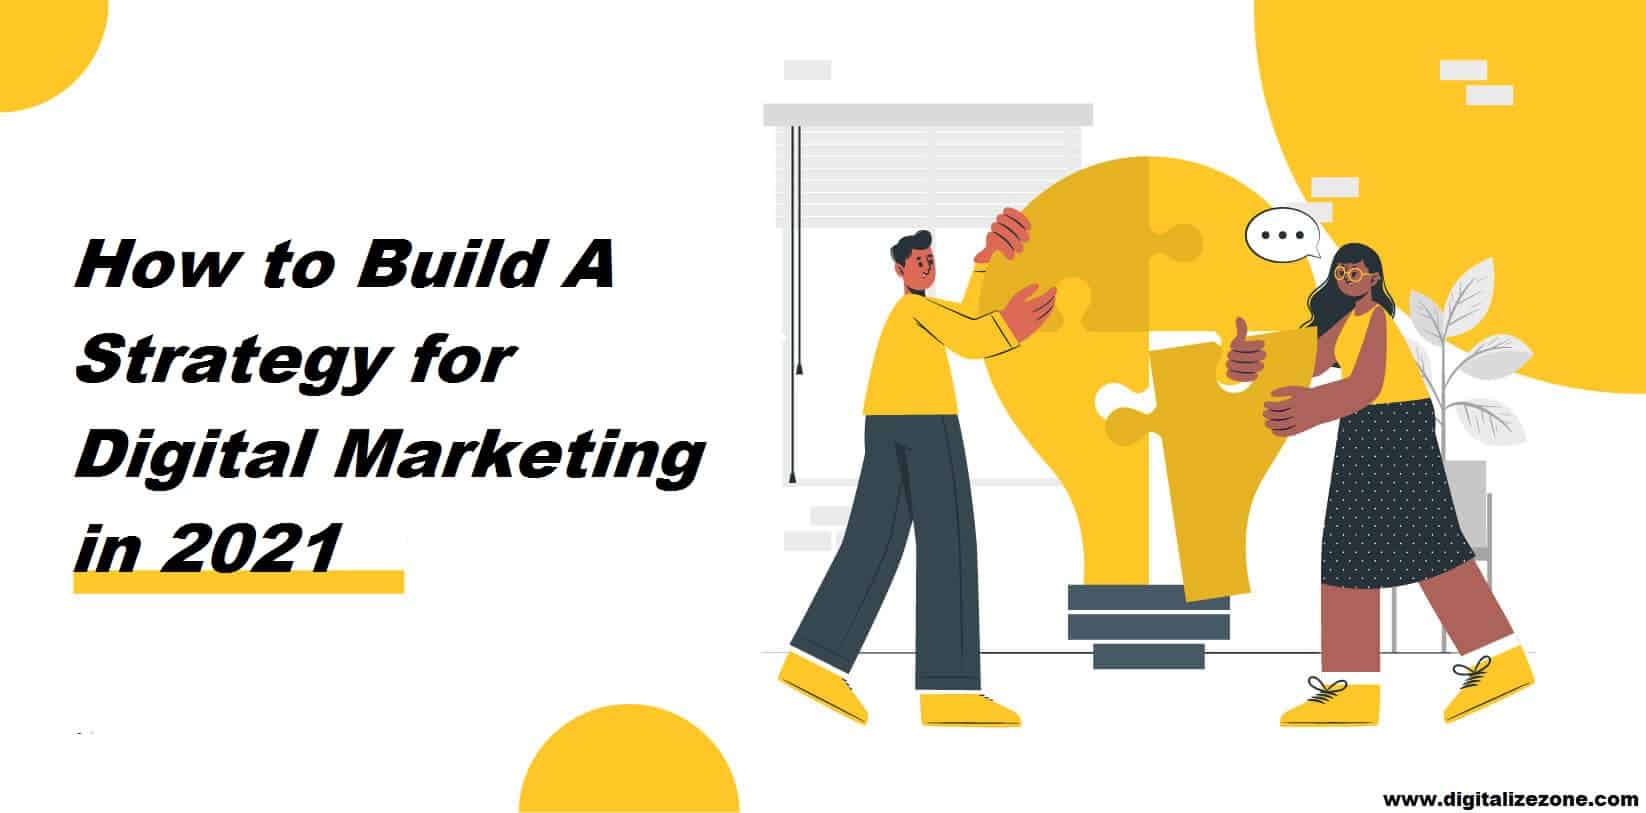 How to Build A Strategy for Digital Marketing in 2021